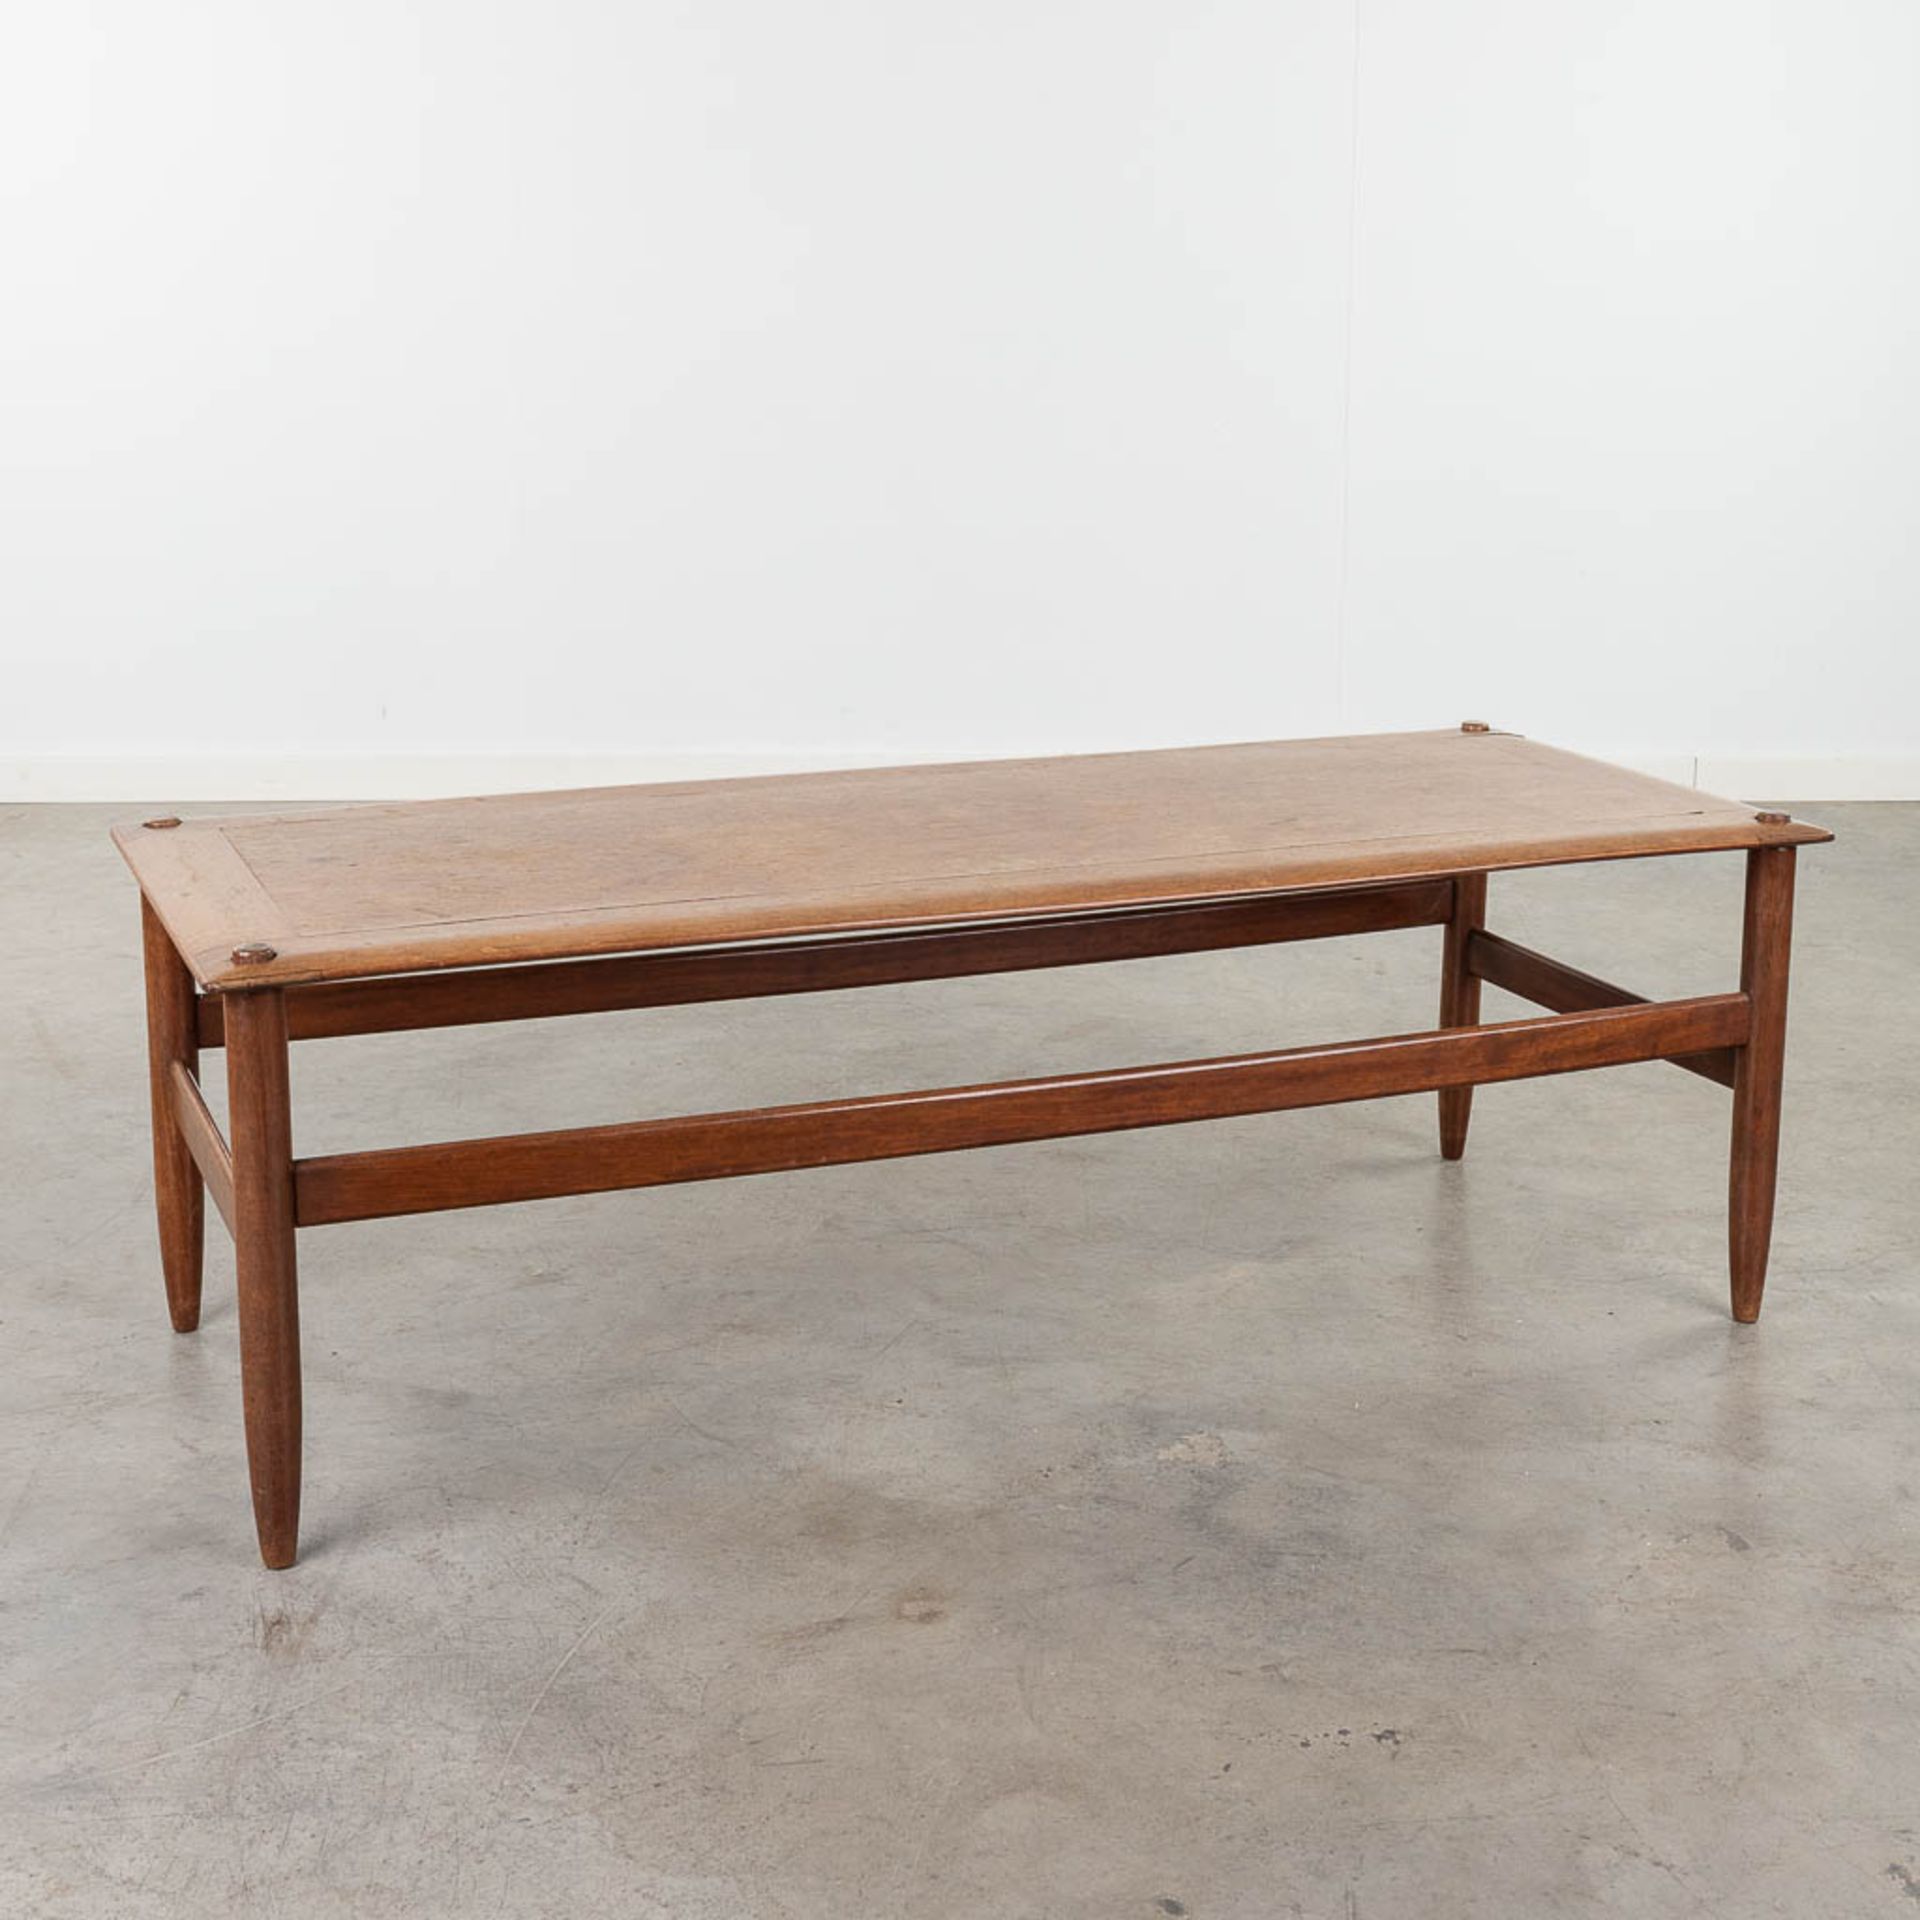 A mid-century coffee table with a reversible top, teak. Circa 1960. (L: 42 x W: 40 x H: 125 cm)